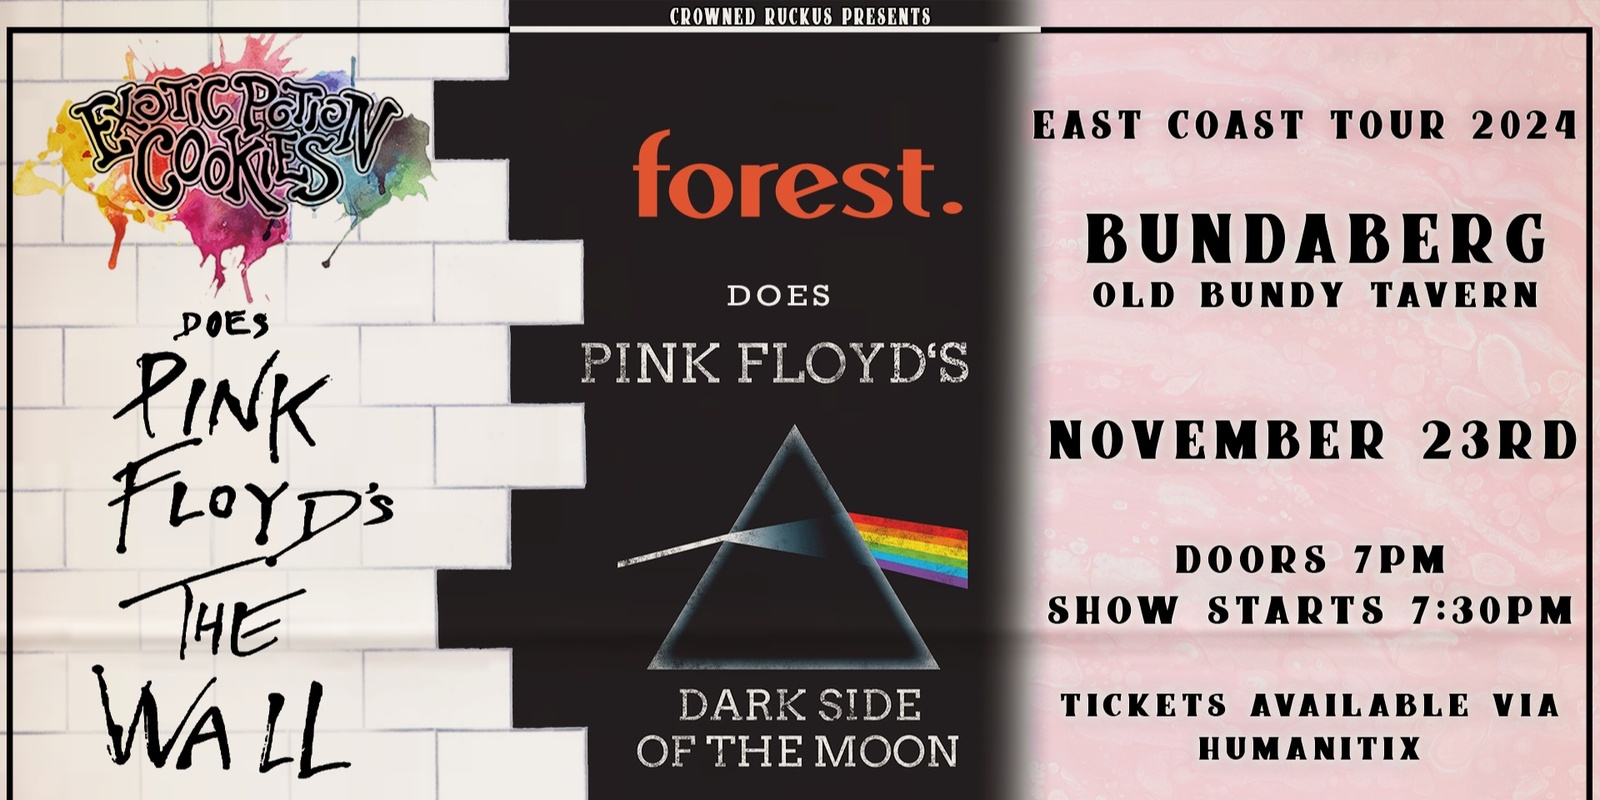 Banner image for C.R Presents: Exotic Potion Cookies does Pink Floyd's The Wall alongside Forest with Dark Side of the Moon - Bundaberg